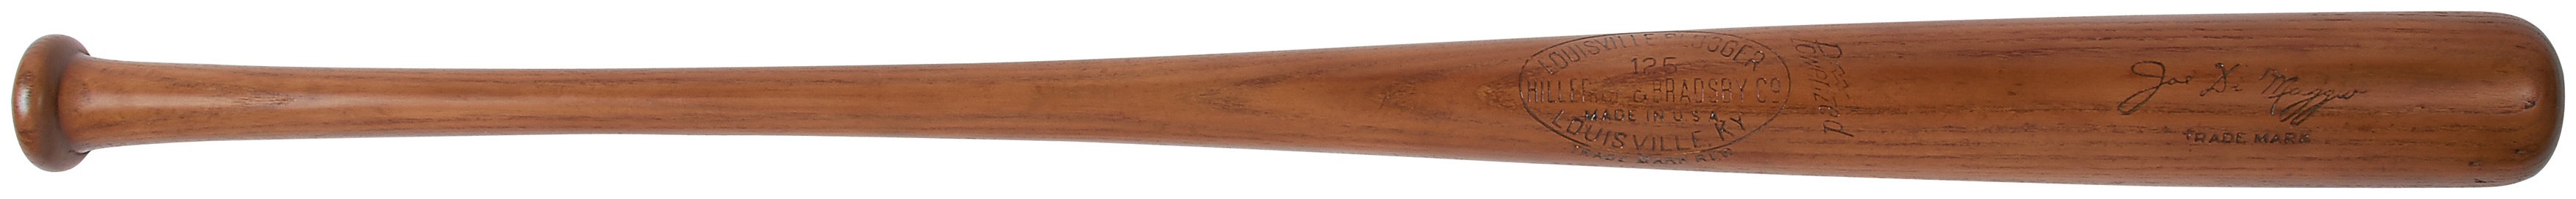 - Circa 1947 Joe DiMaggio Game Used Bat with PSA LOA (ex-George "Snuffy" Stirnweiss Collection)